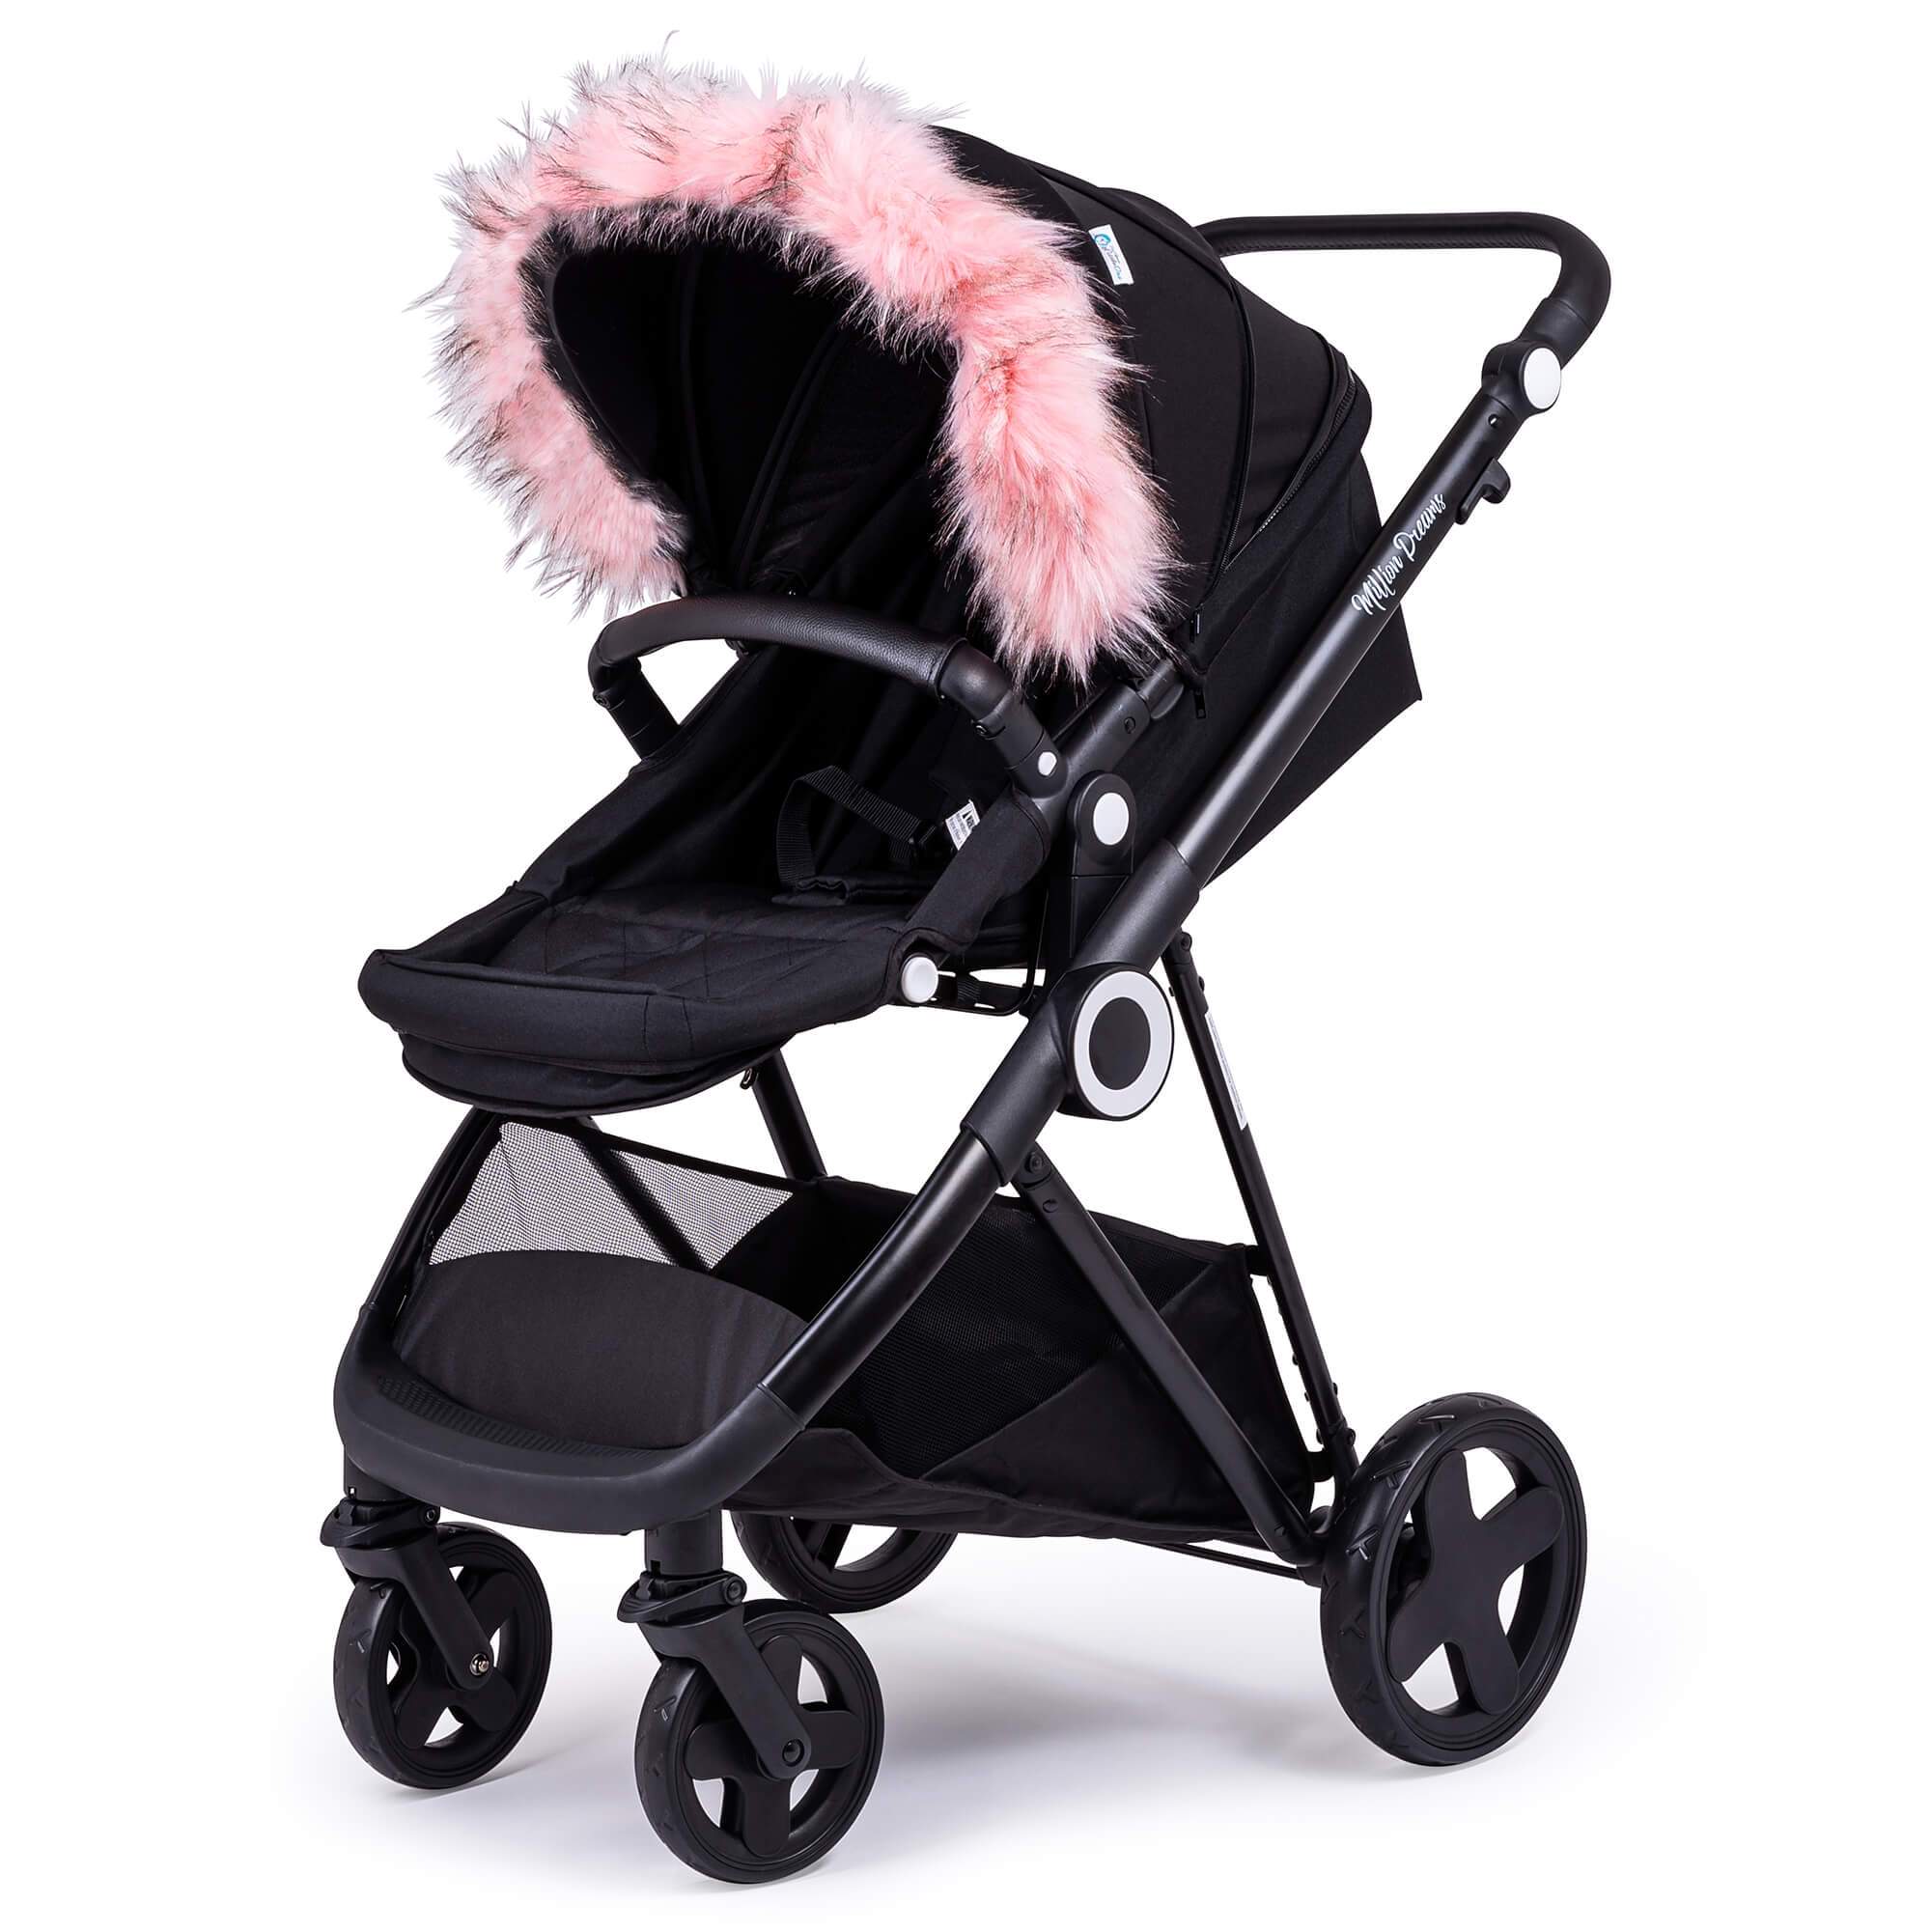 Pram Fur Hood Trim Attachment for Pushchair Compatible with Formula - Light Pink / Fits All Models | For Your Little One